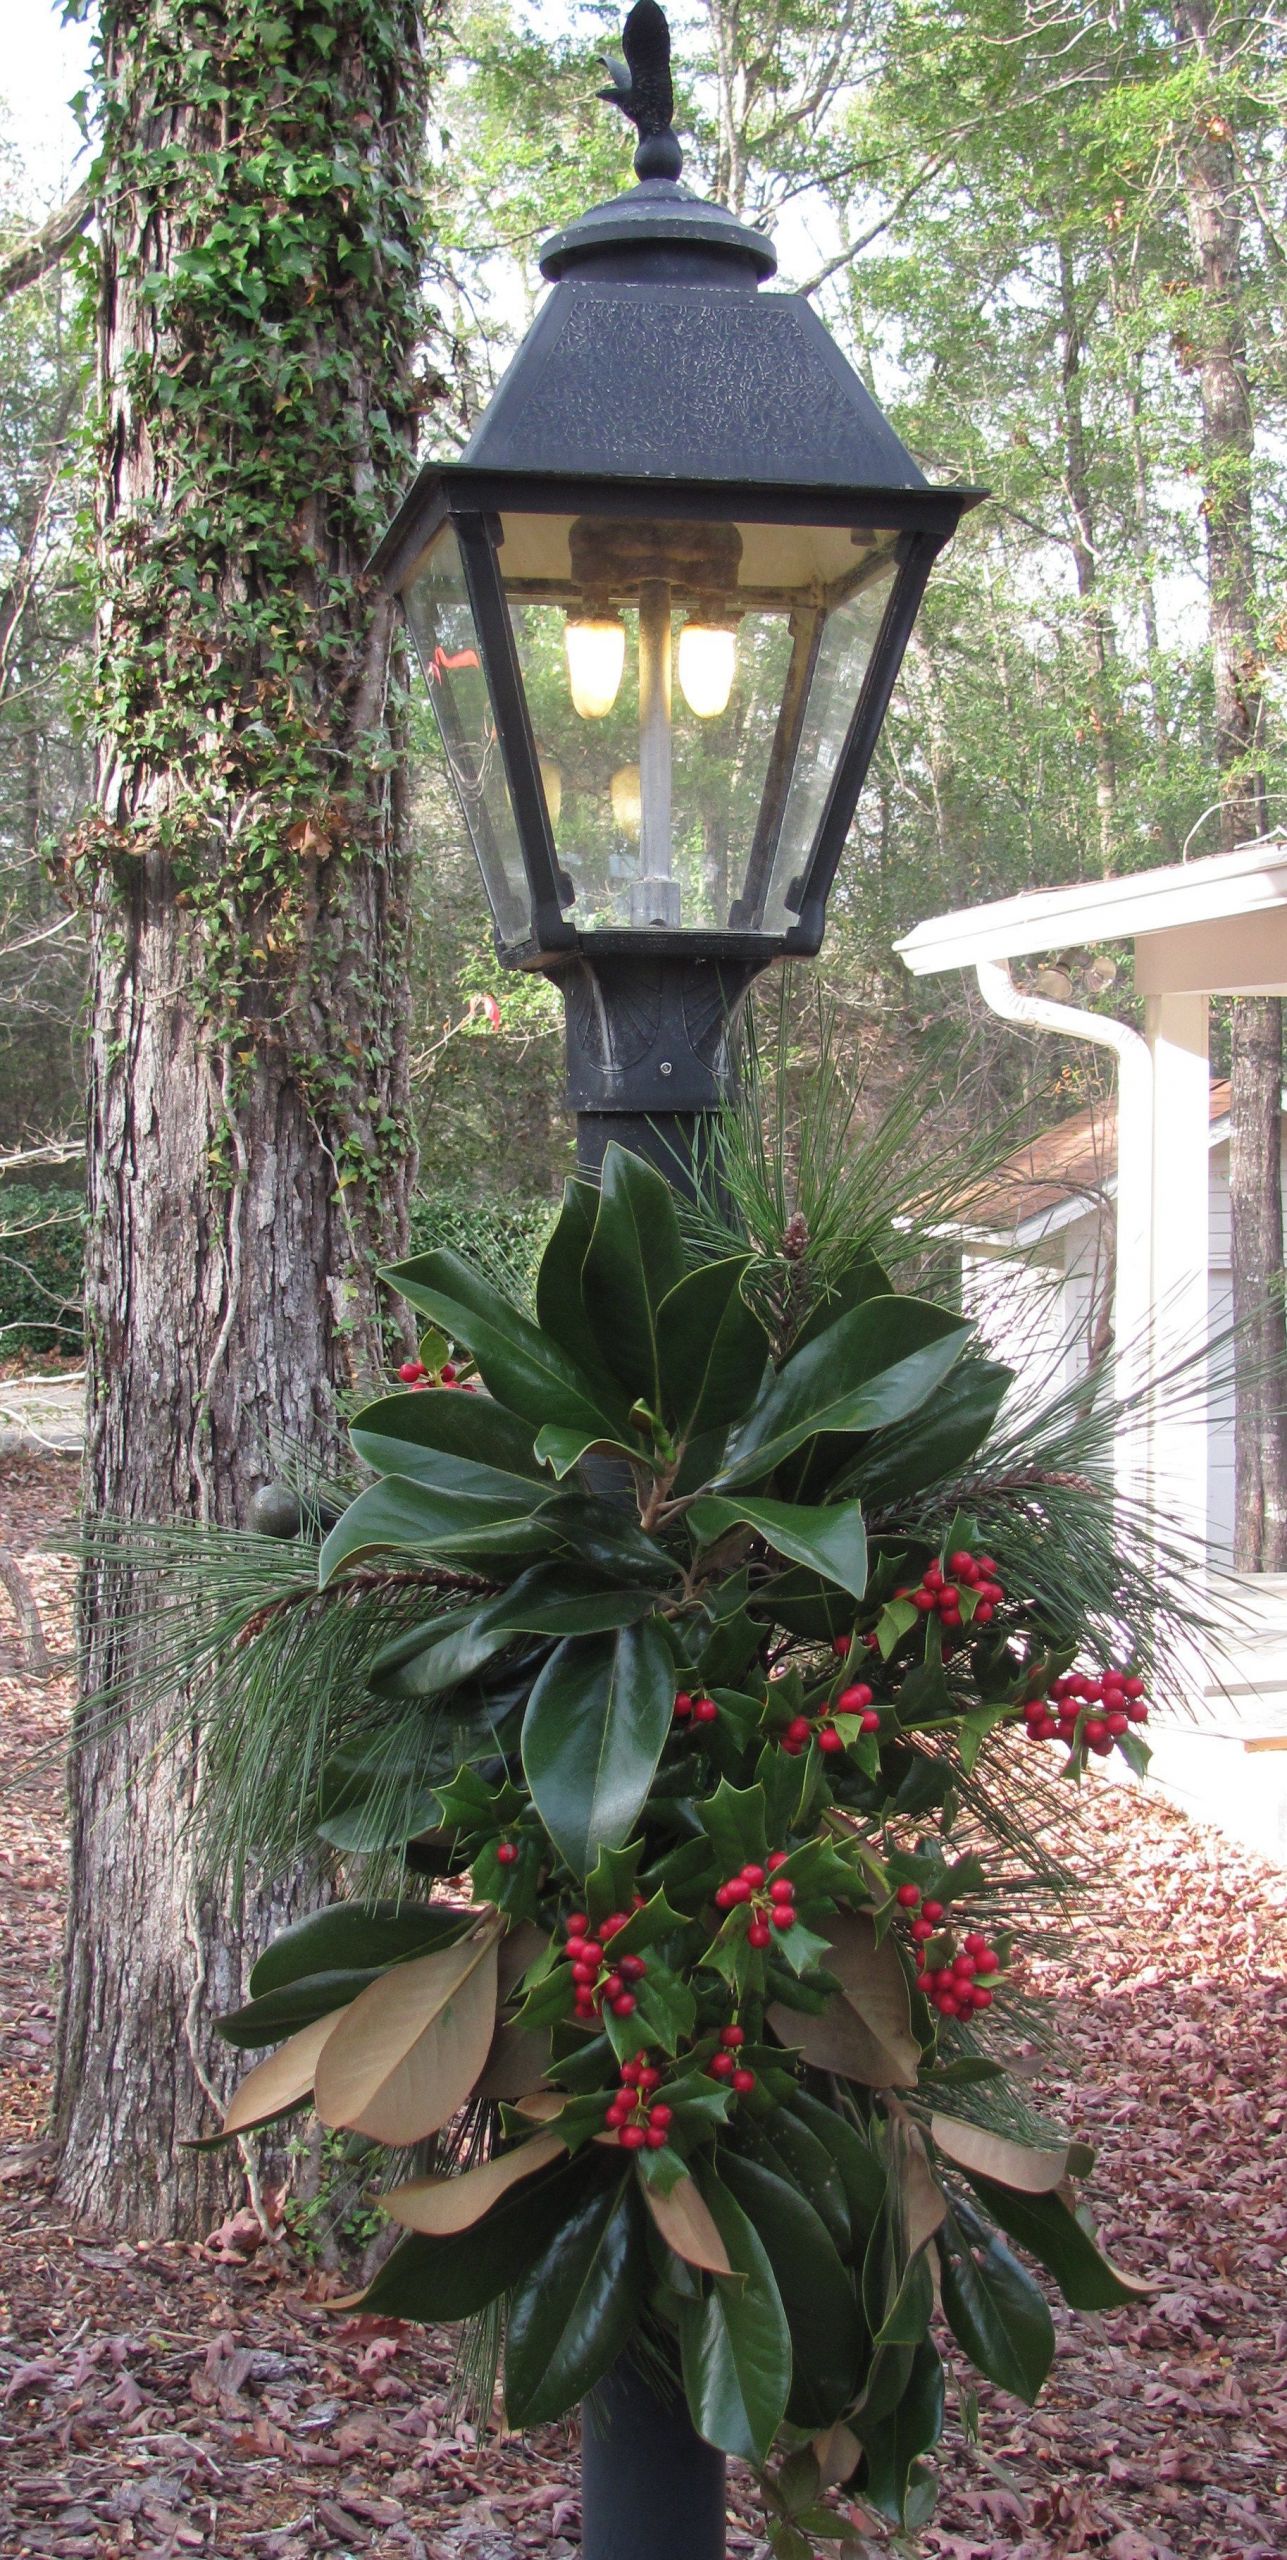 Outdoor Christmas Lamp Post
 gas lamp with fresh greenery by me Beautiful We visited